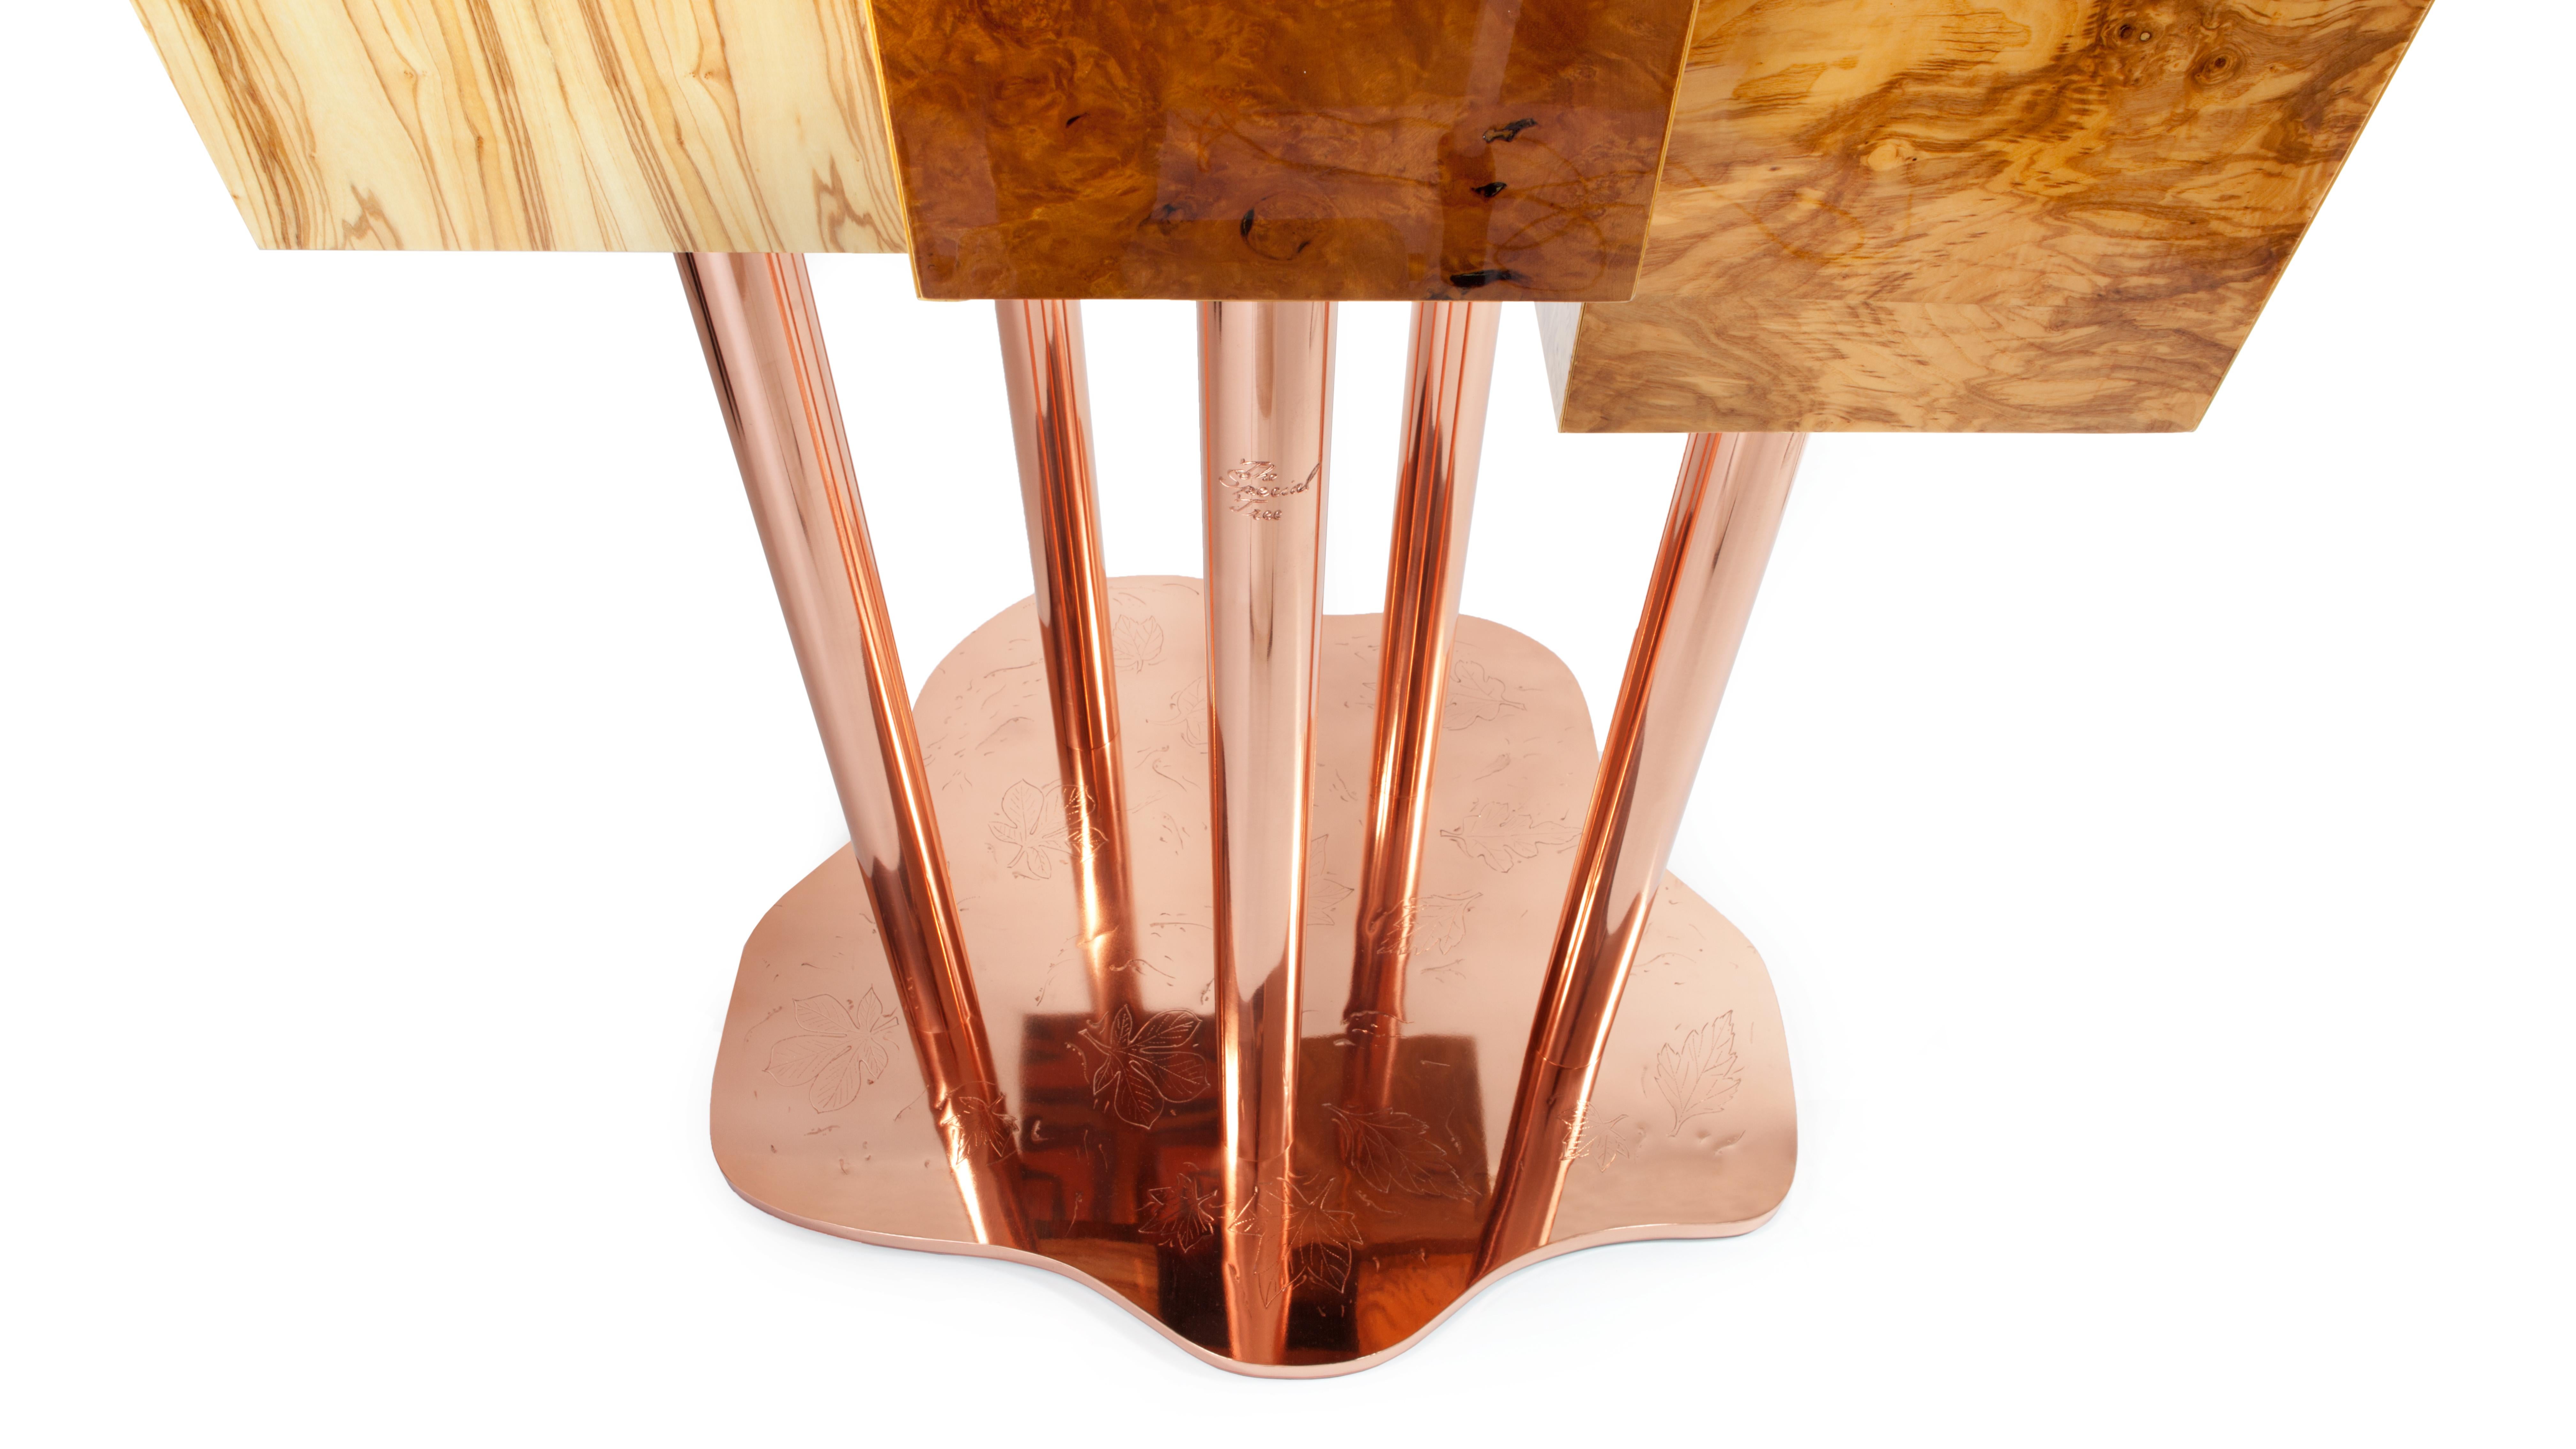 Polished Special Tree Cabinet, Woods and Copper, InsidherLand by Joana Santos Barbosa For Sale